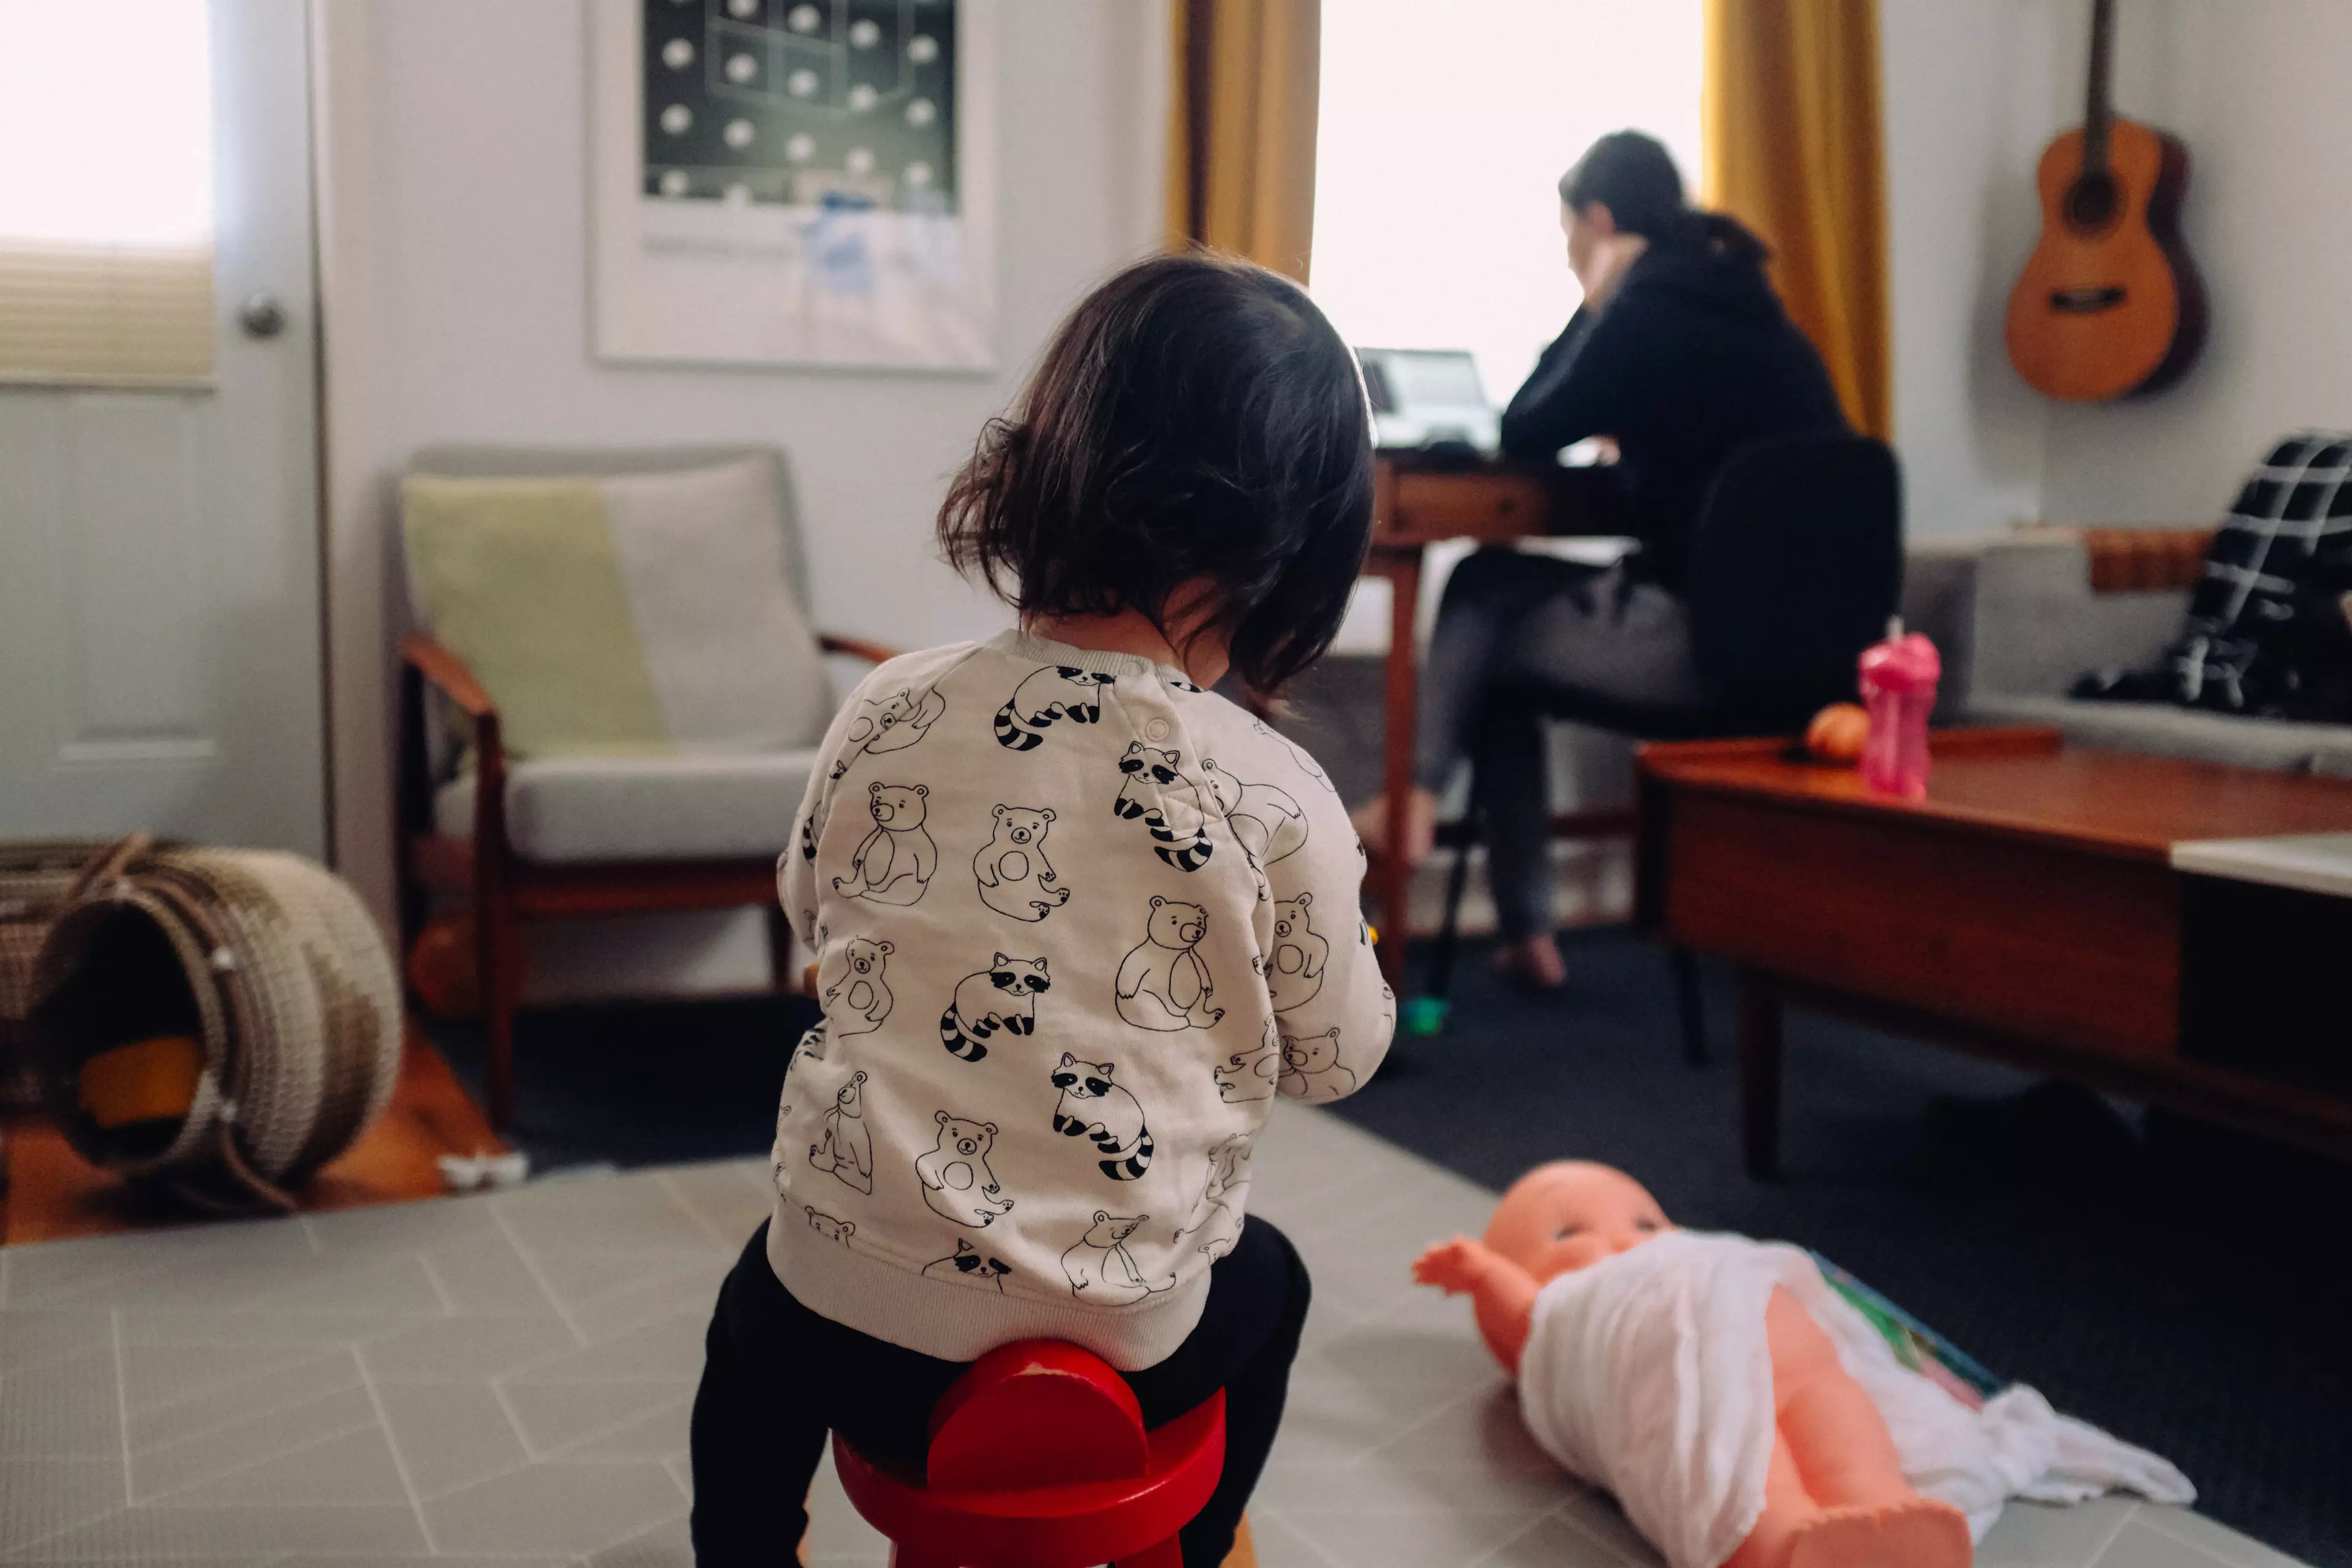 Mums have had to do most of the domestic and childcare work during lockdown, research suggests (